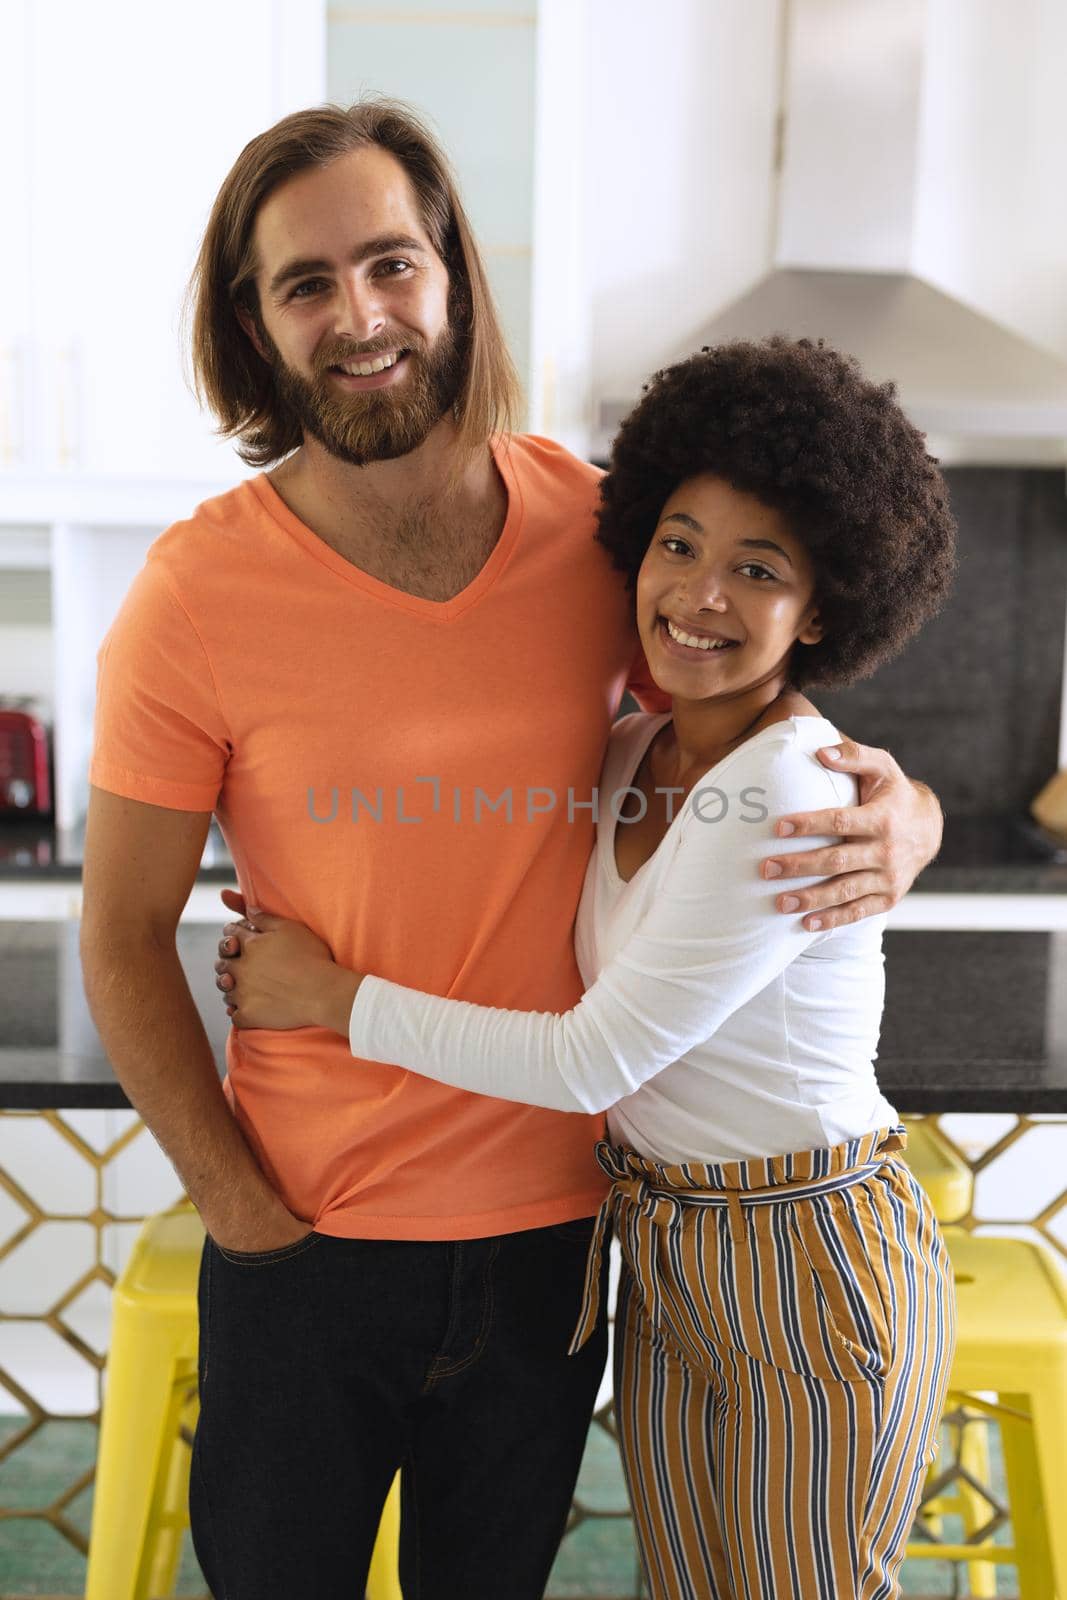 Portrait of happy diverse couple in kitchen smiling and embracing by Wavebreakmedia